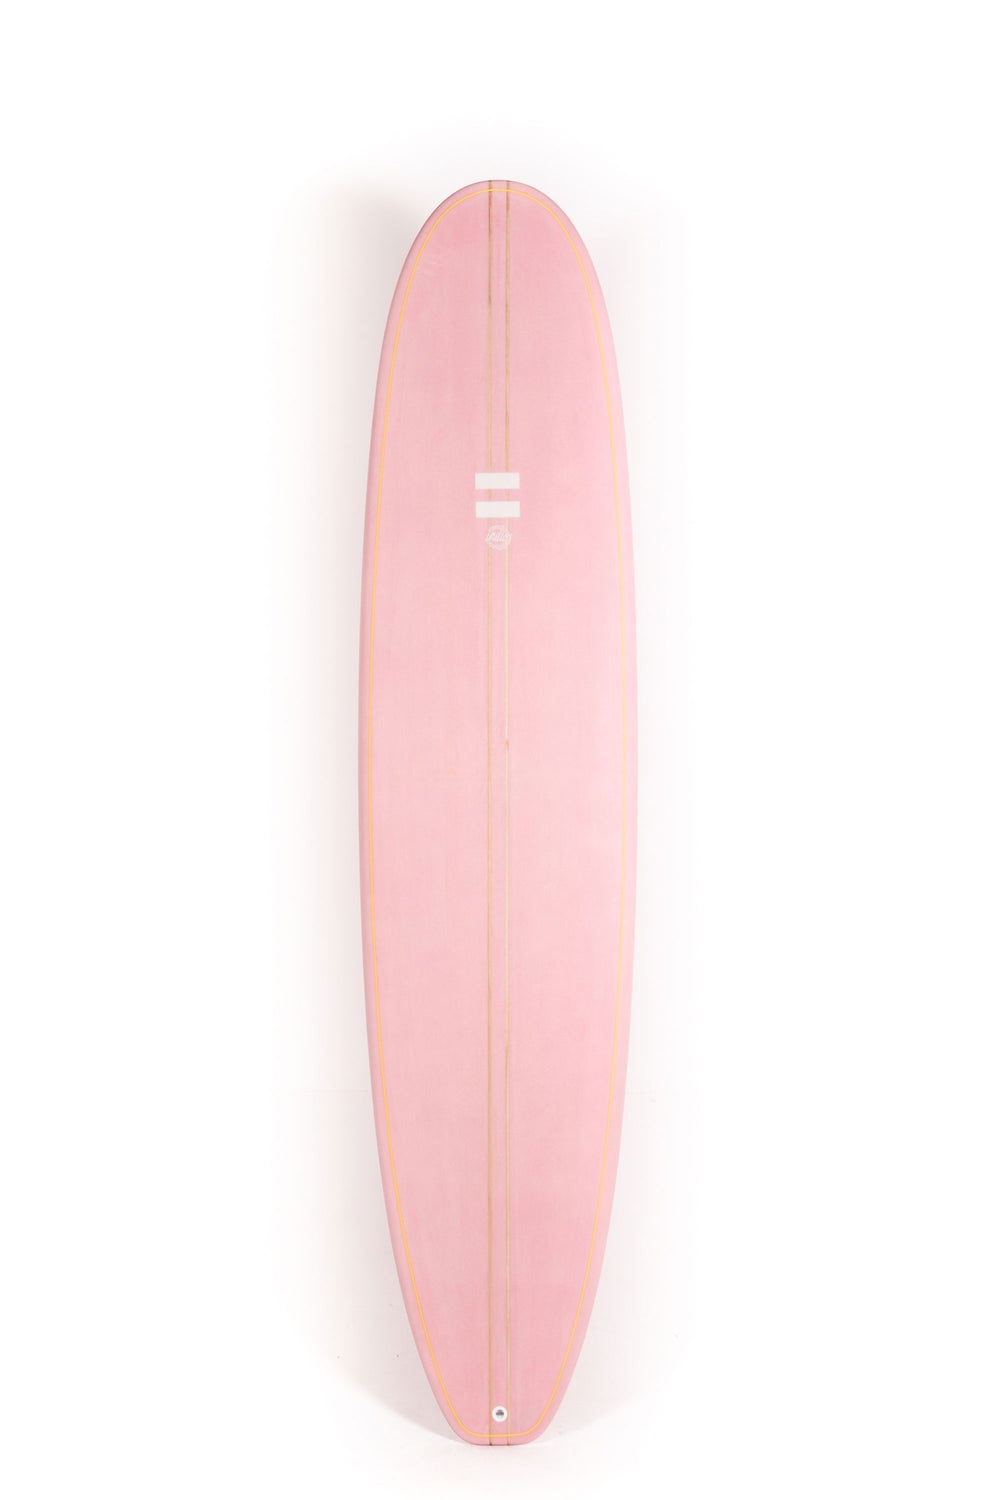 Pukas-Surf-Shop-Indio-Surfboards-Mid-Length-pink-8_0